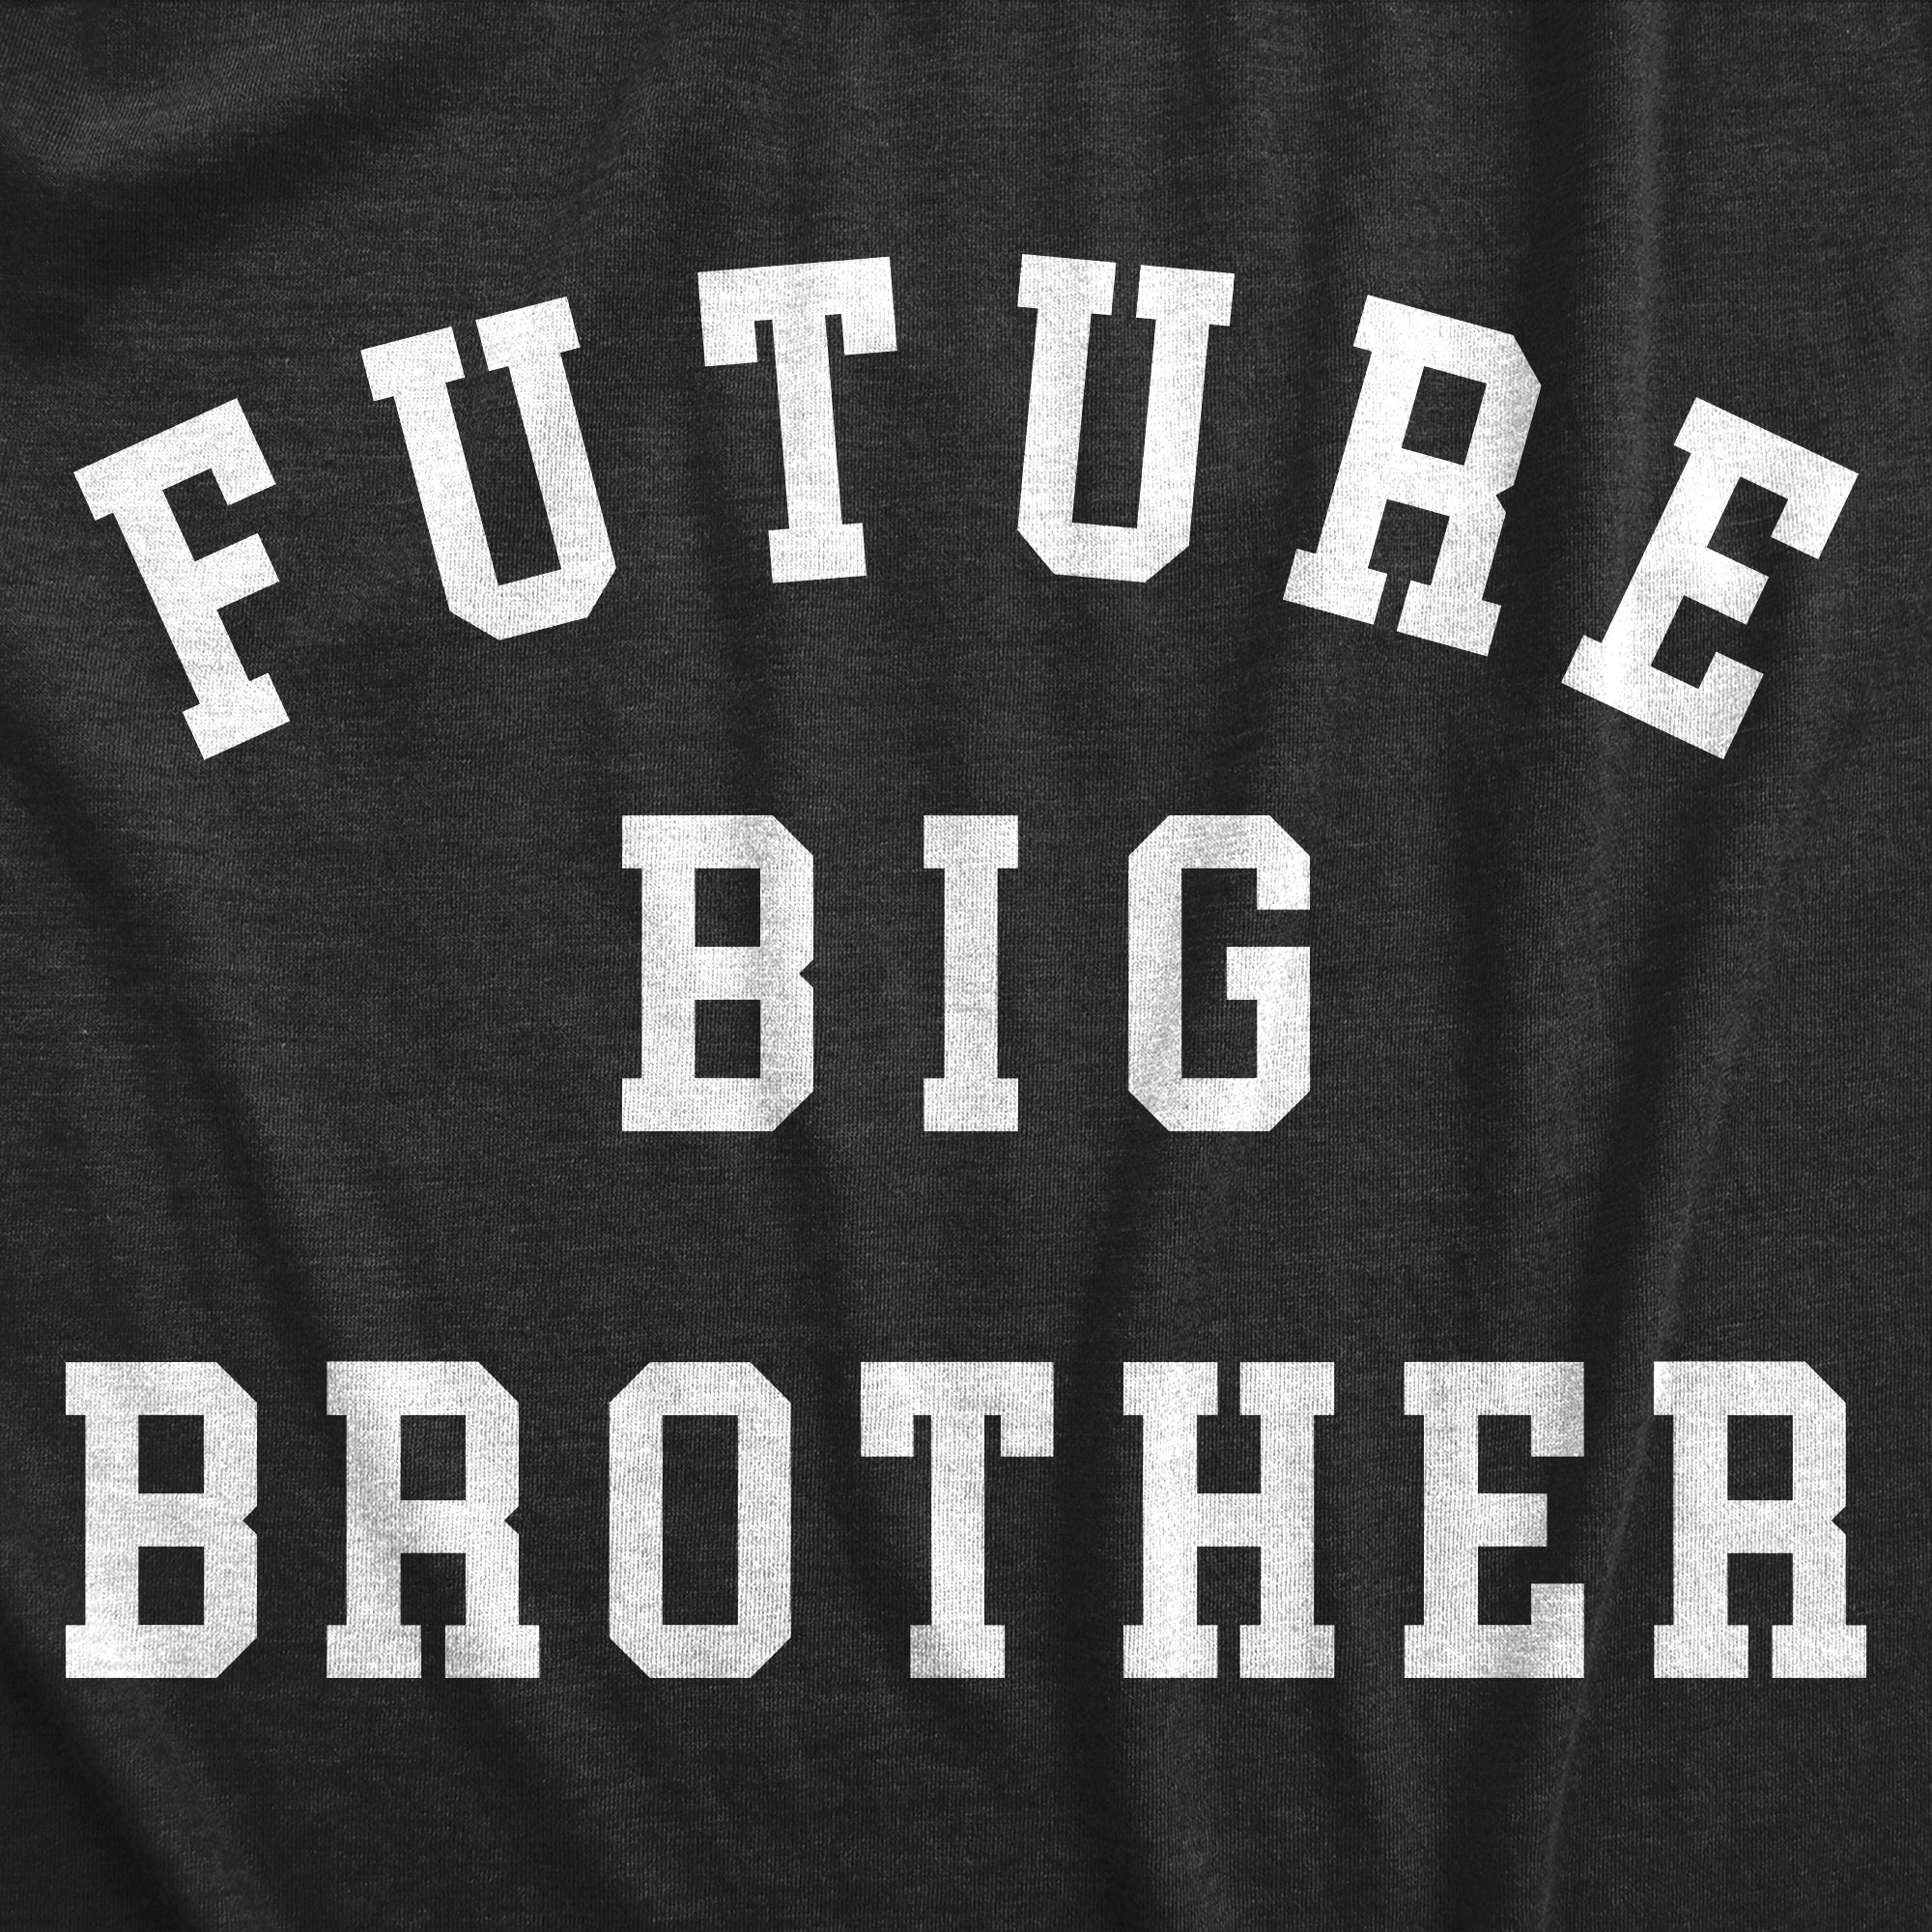 Funny Heather Black - Future Big Brother Future Big Brother Onesie Nerdy Brother Tee